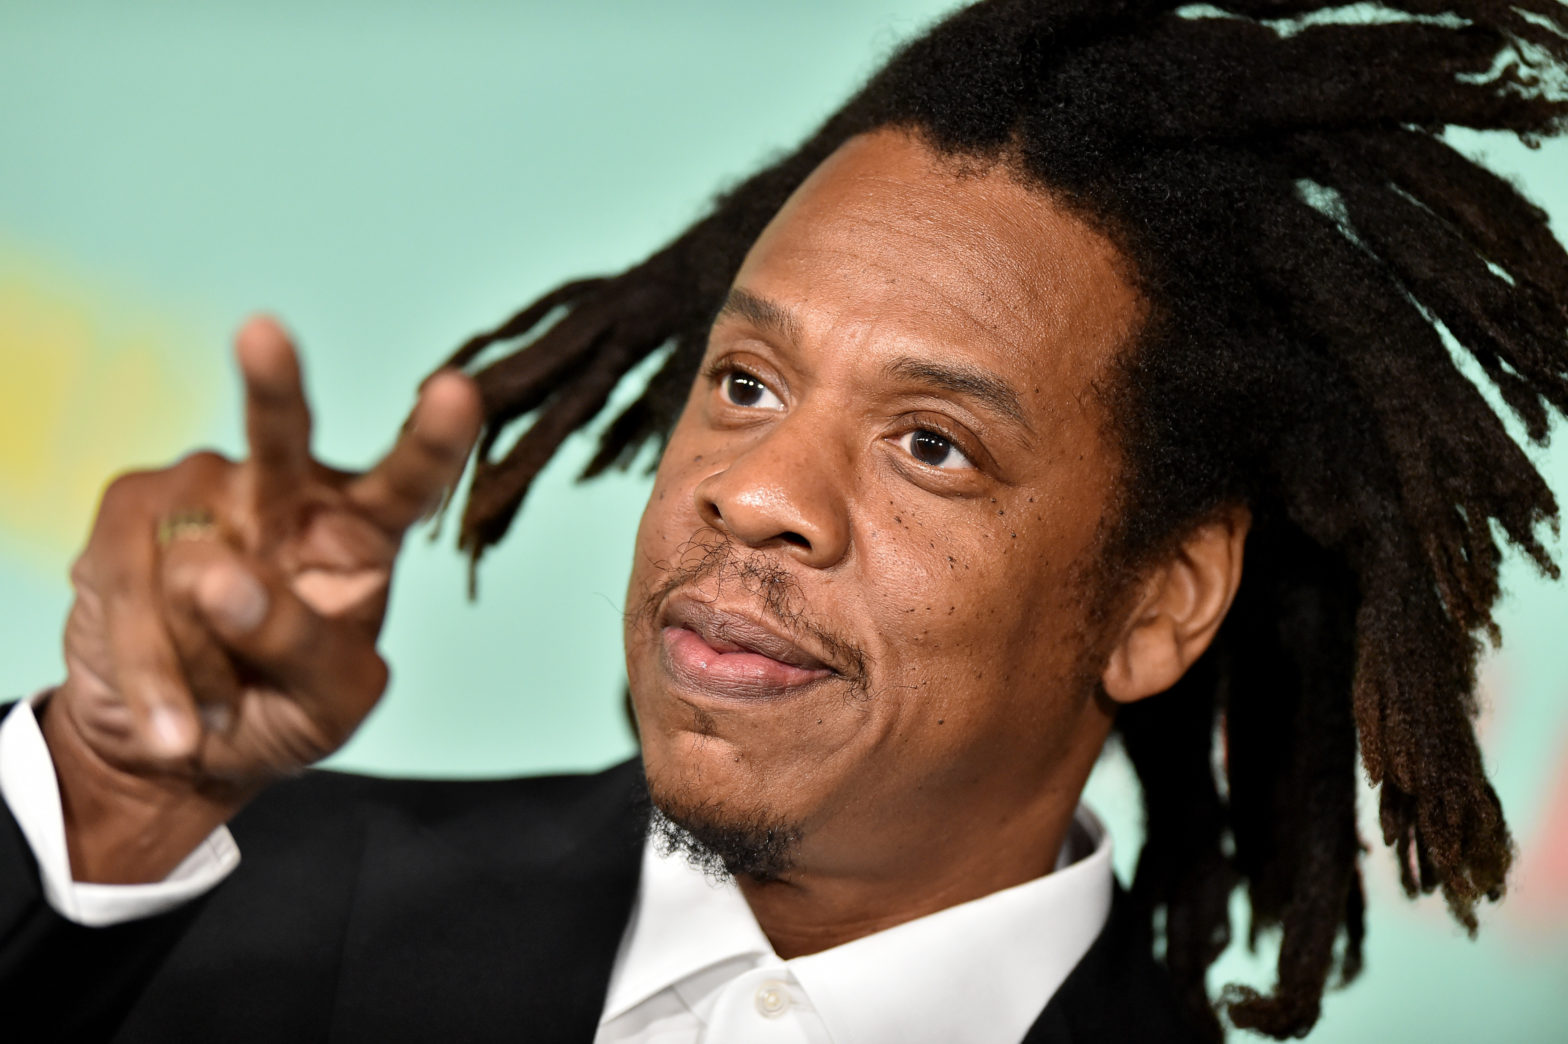 Bacardi Reportedly Accuses Jay-Z Of Exaggerating The Valuation Of His Ownership Stake In D'Ussé